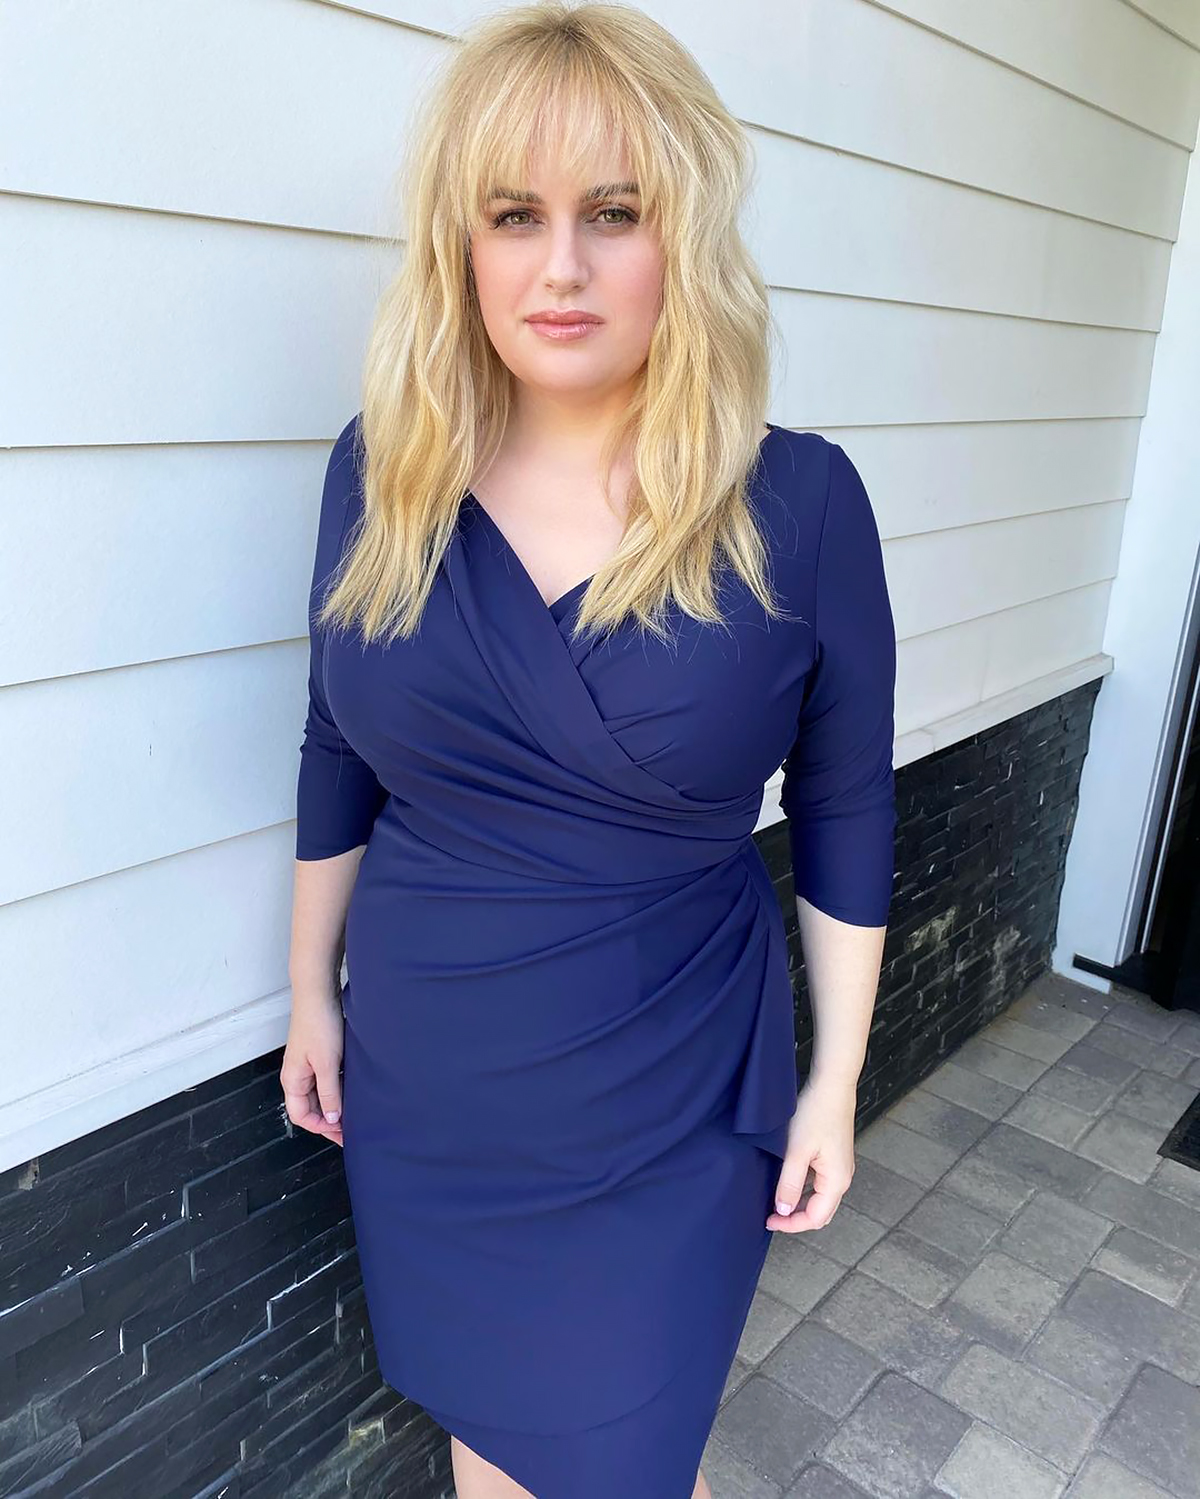 Rebel Wilson Says She's Come Into Her Own Amid Wellness Journey